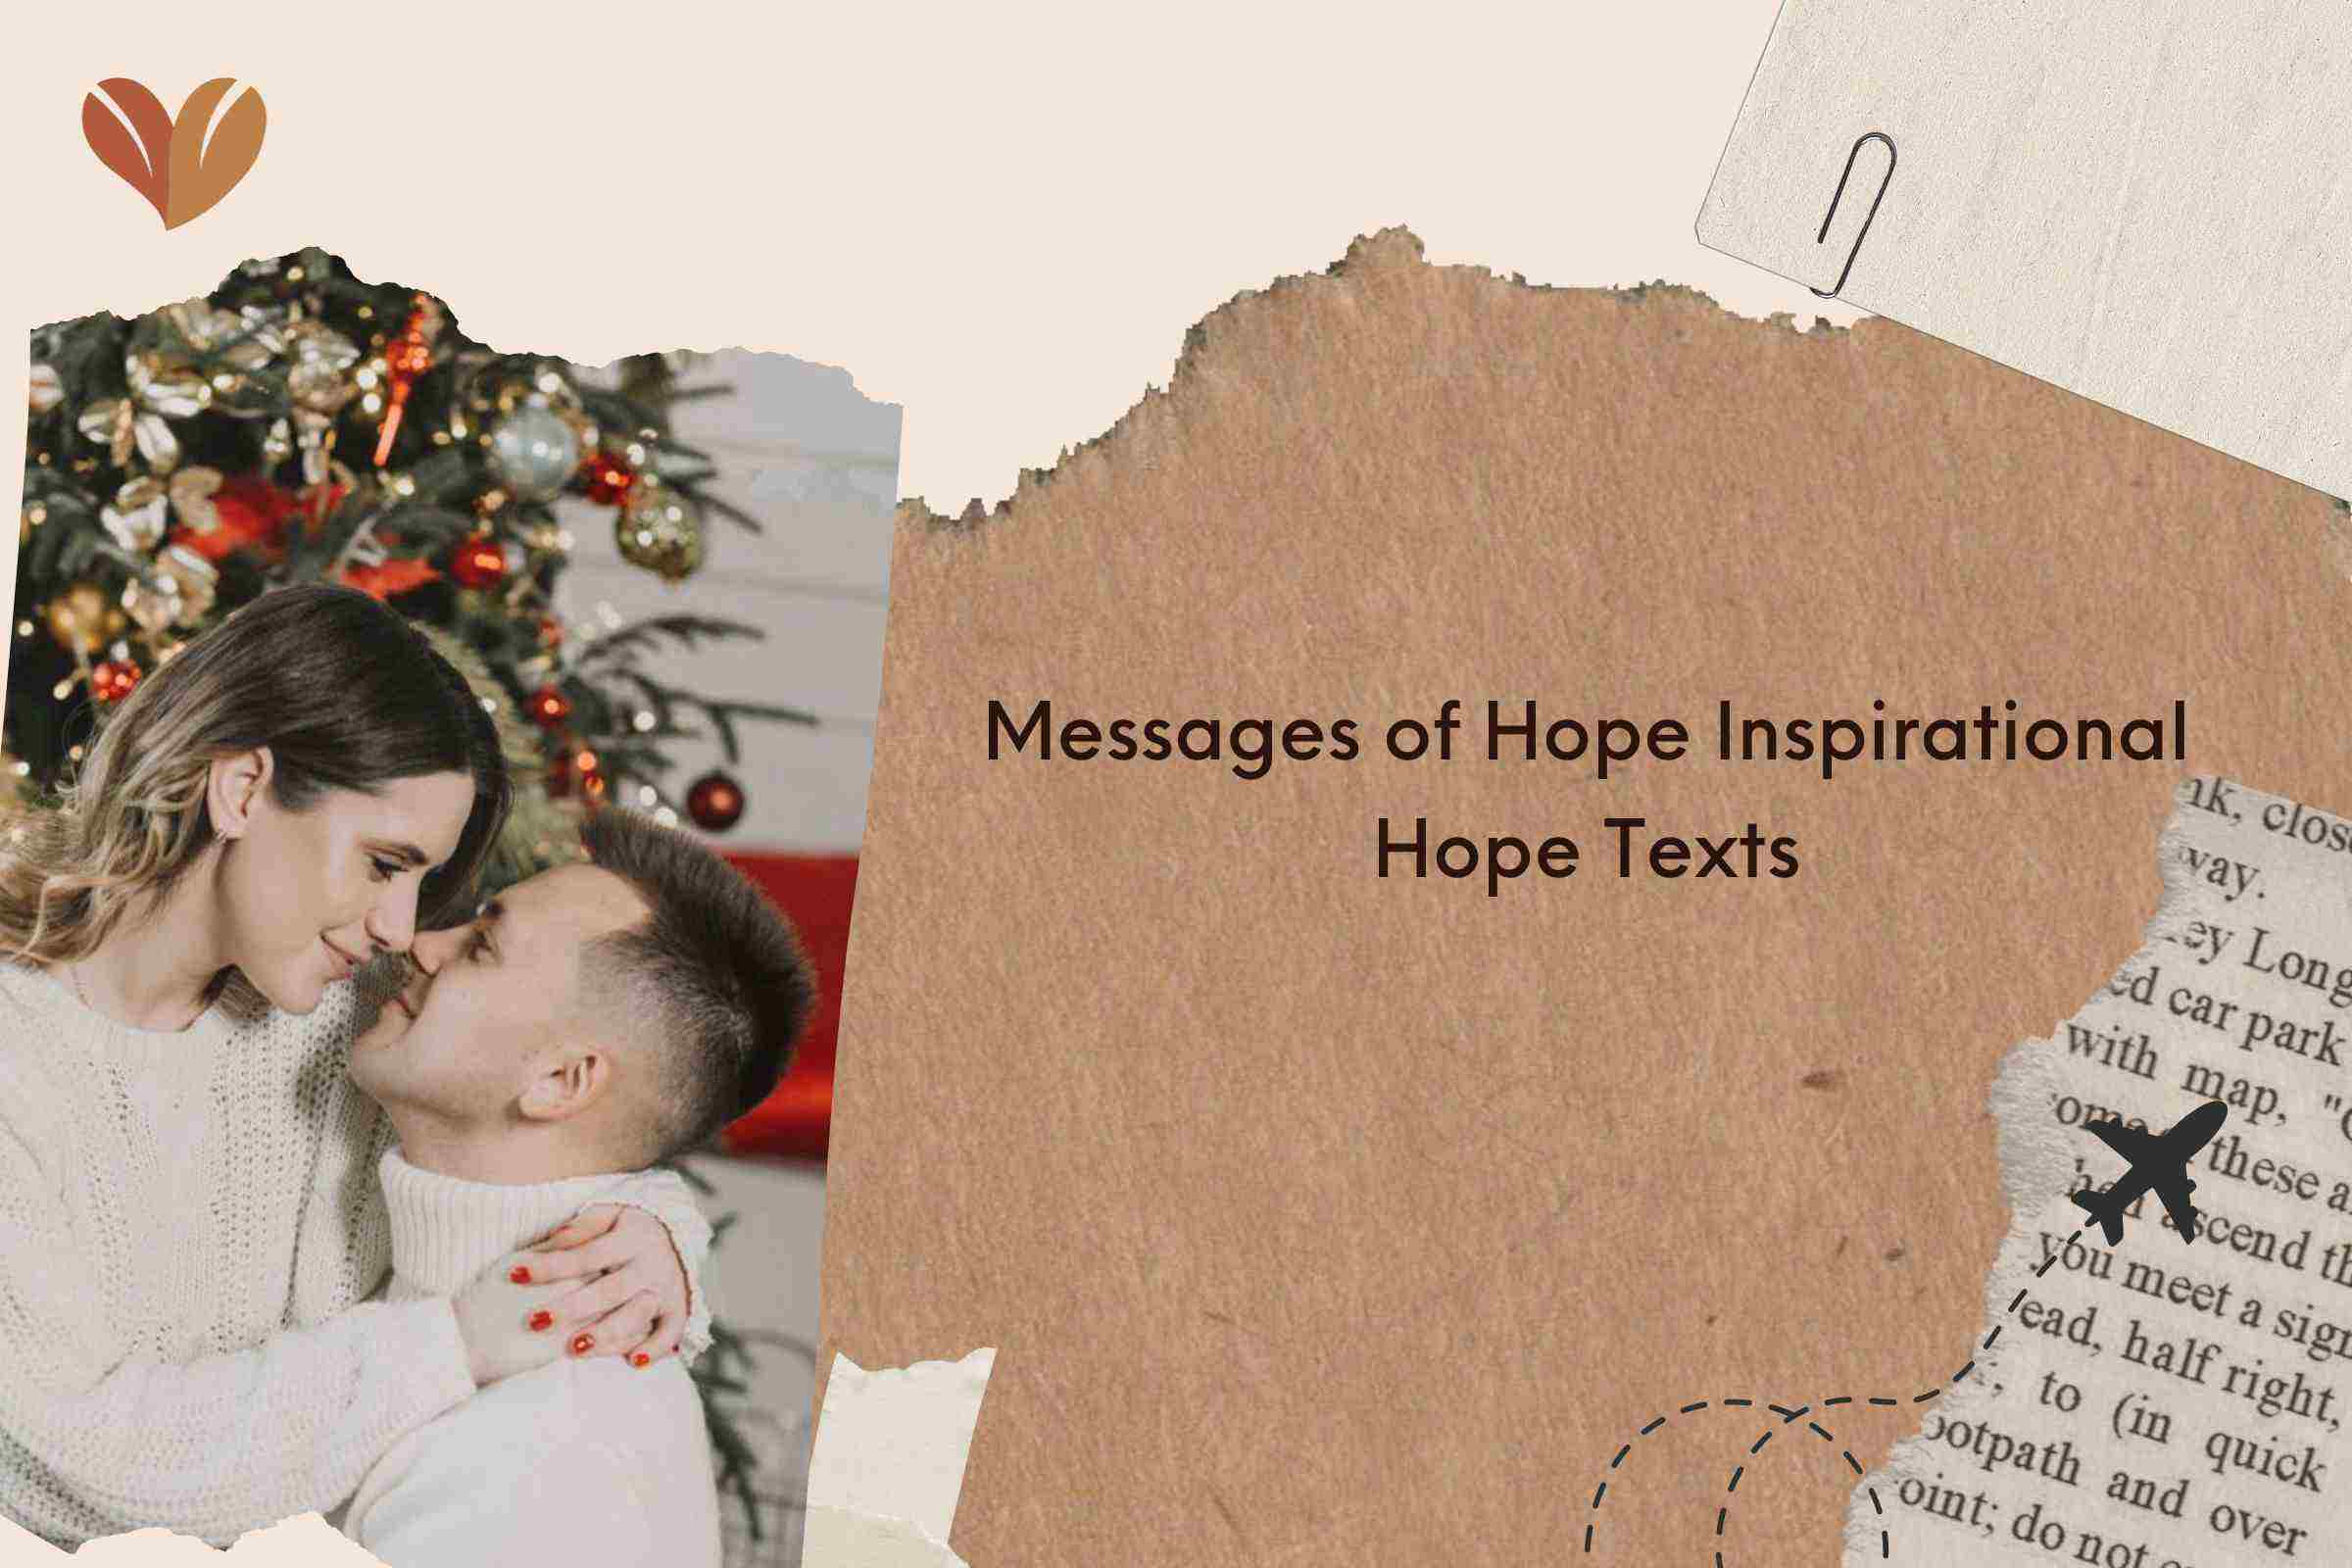 Messages of Hope Inspirational Hope Texts